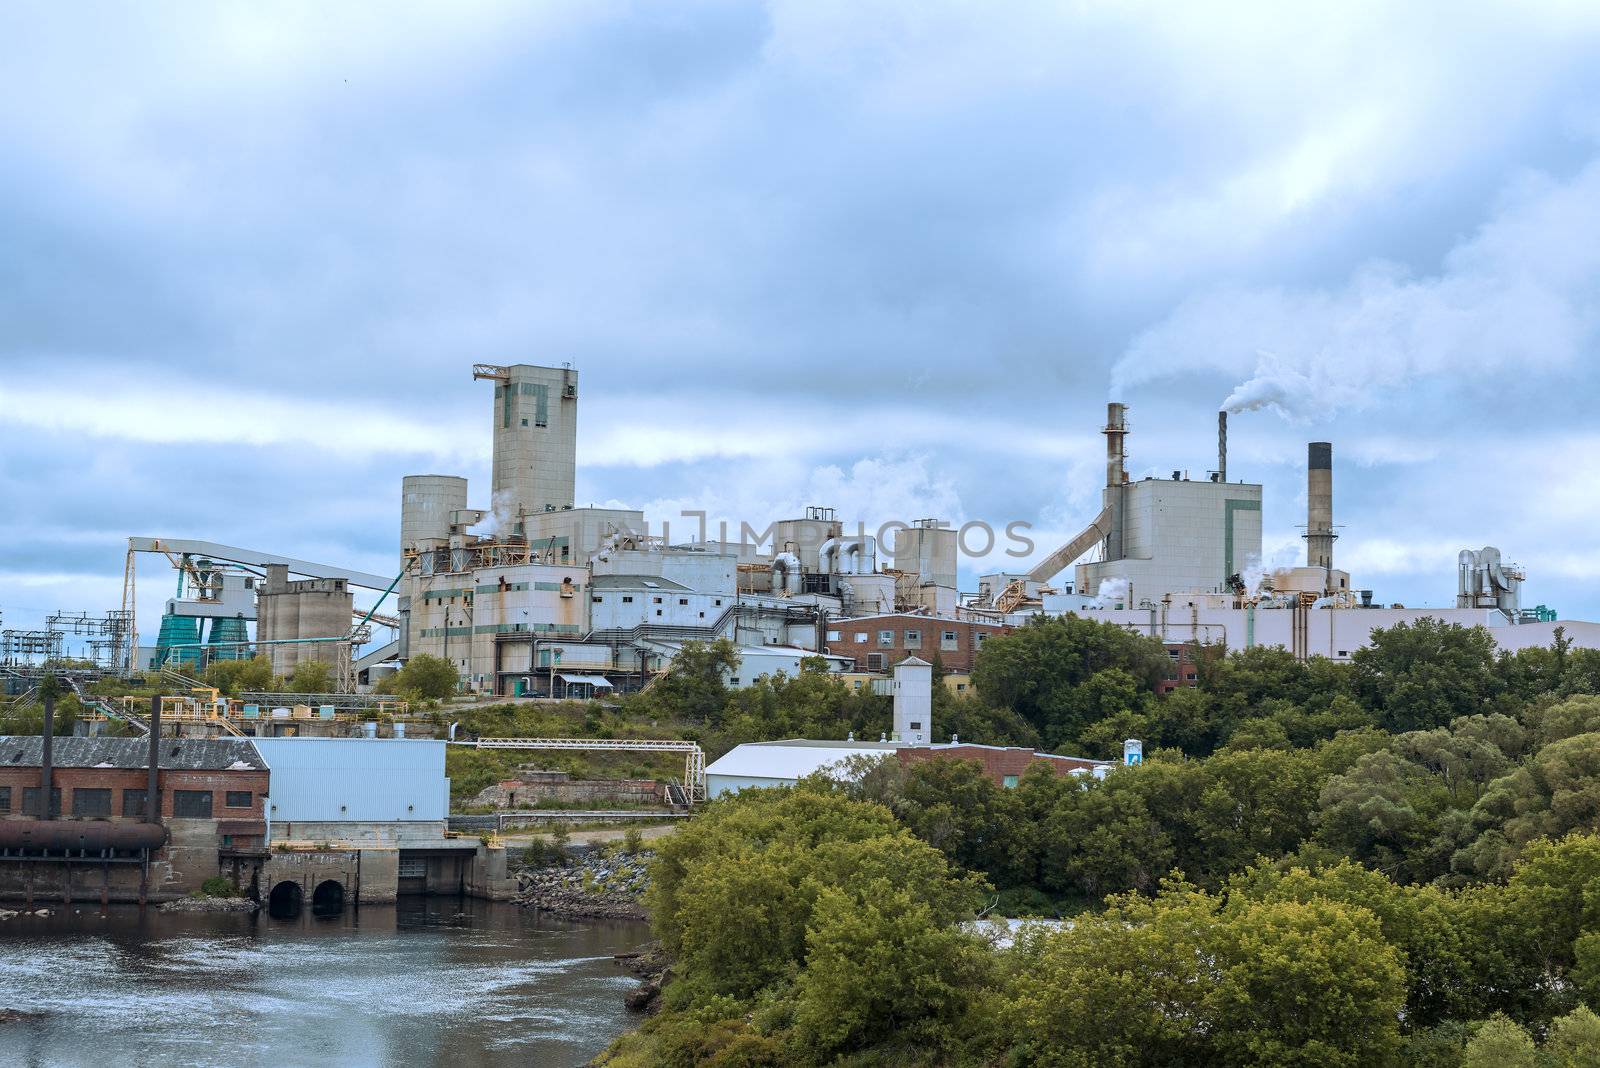 Domtar paper mill in town of Espanola, Ontario Canada by Marcus